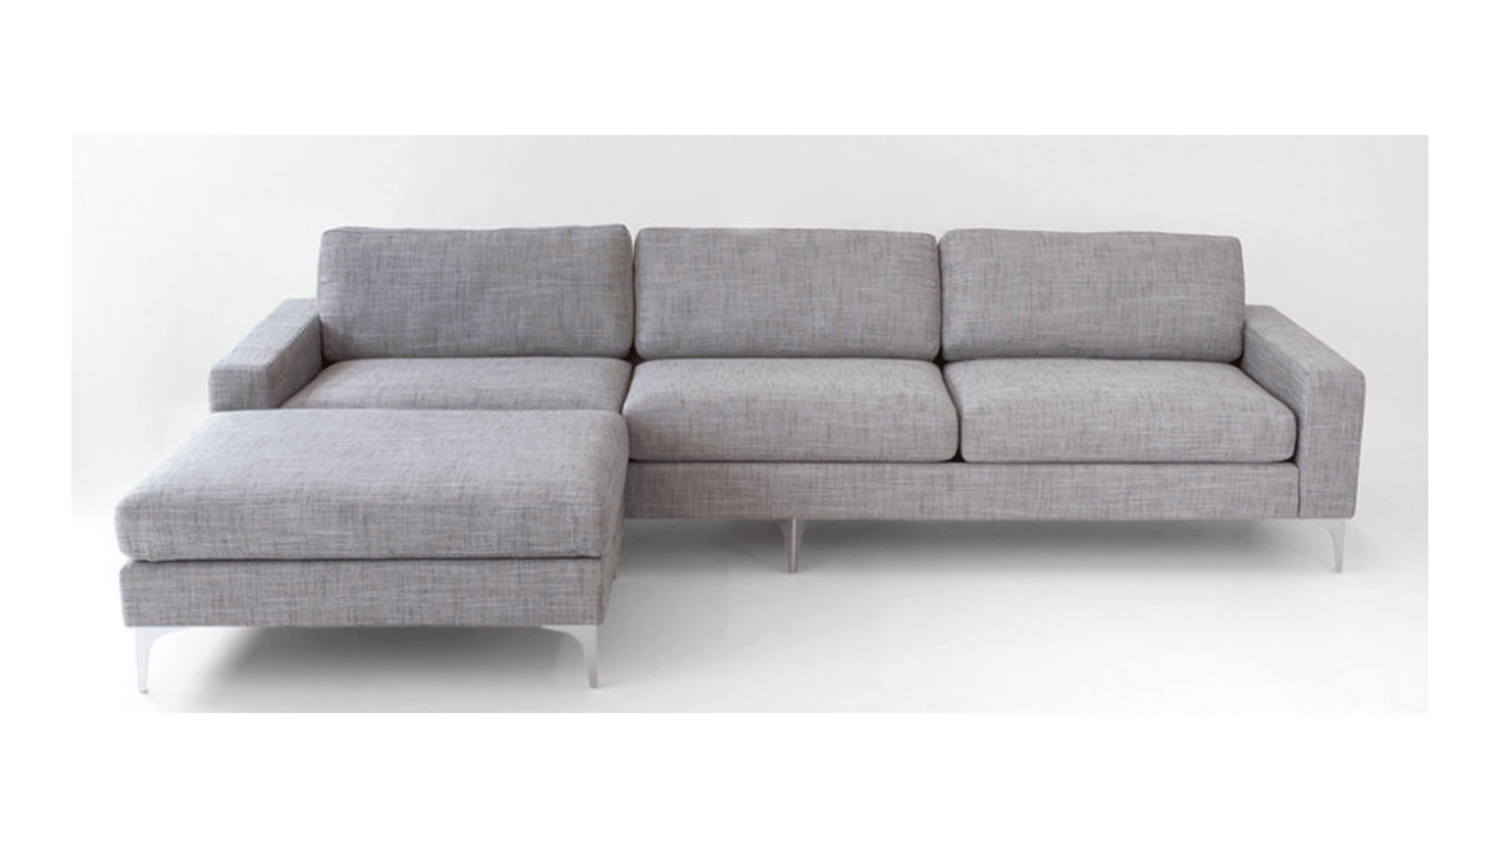 Soft Seating Clevedon Sofa